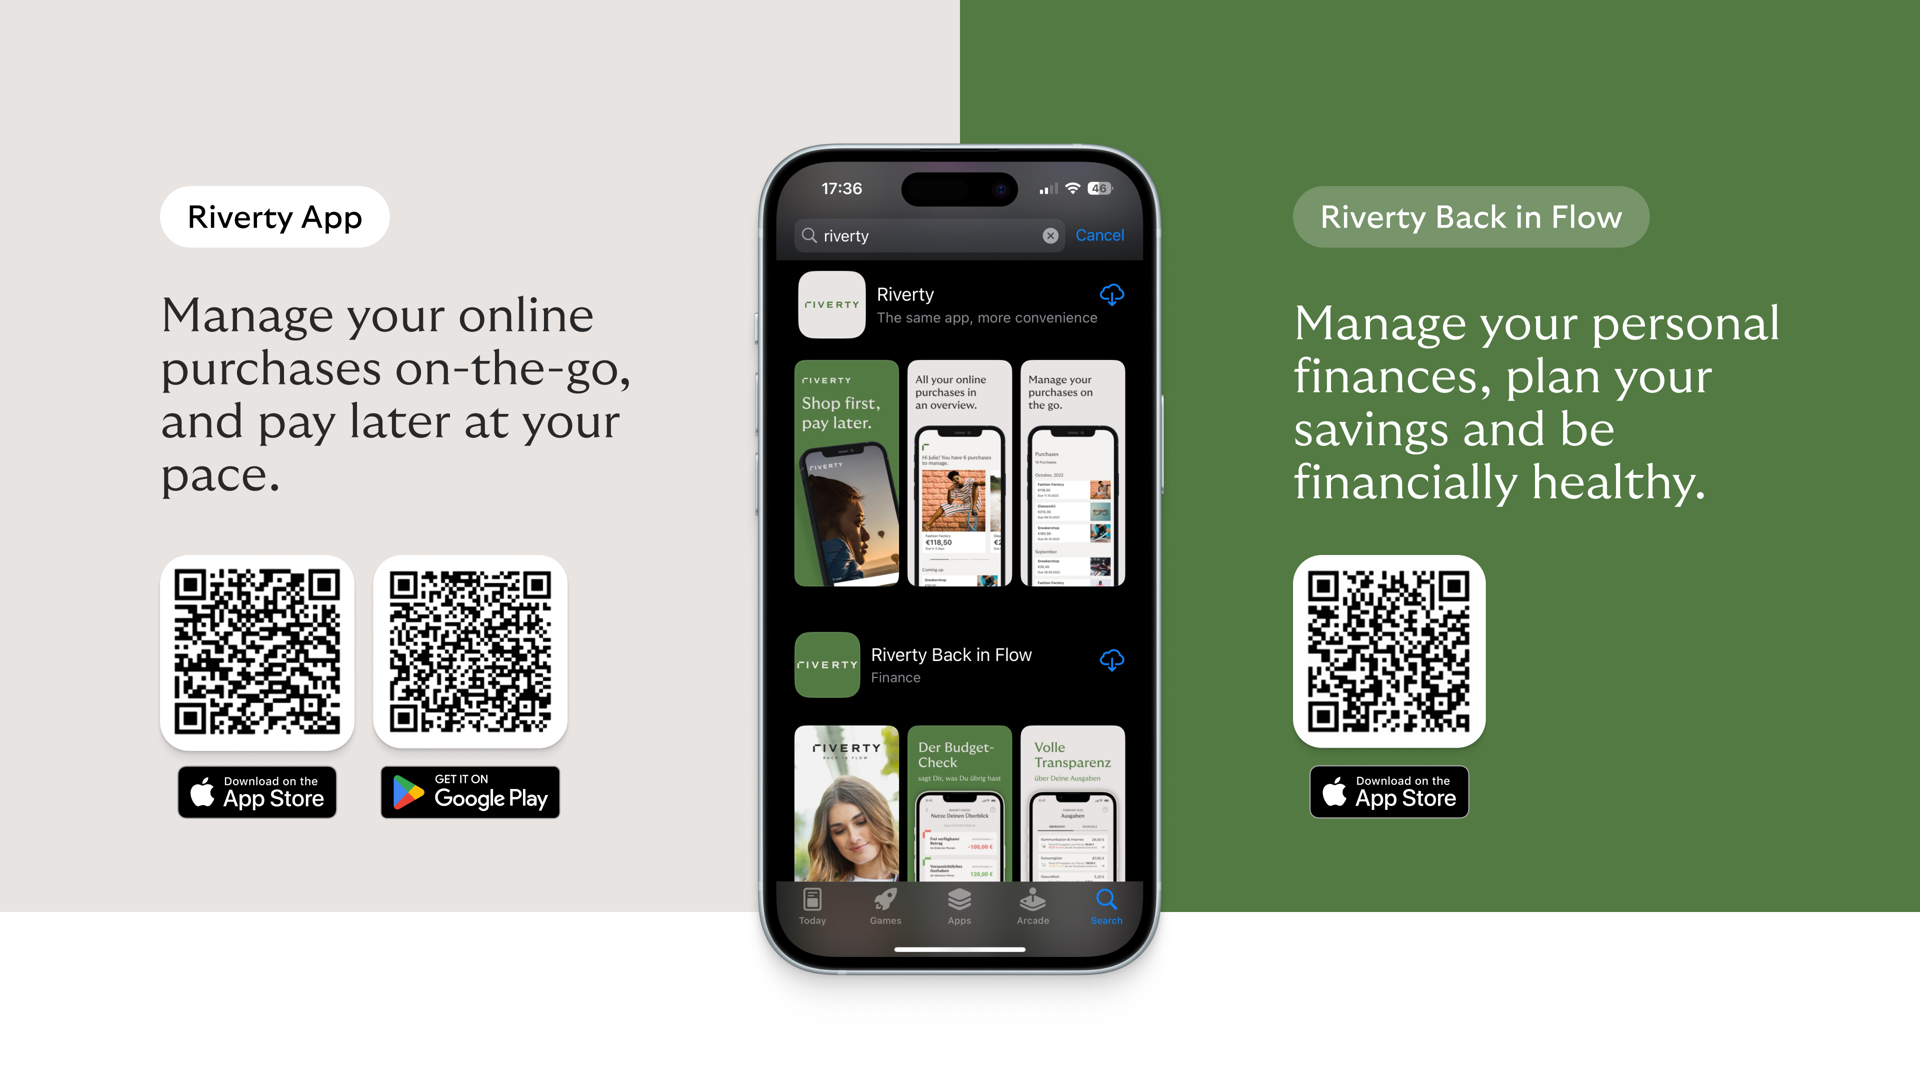 Image showing both Riverty Apps and QR-Codes that lead to the PlayStore and iOS Store.